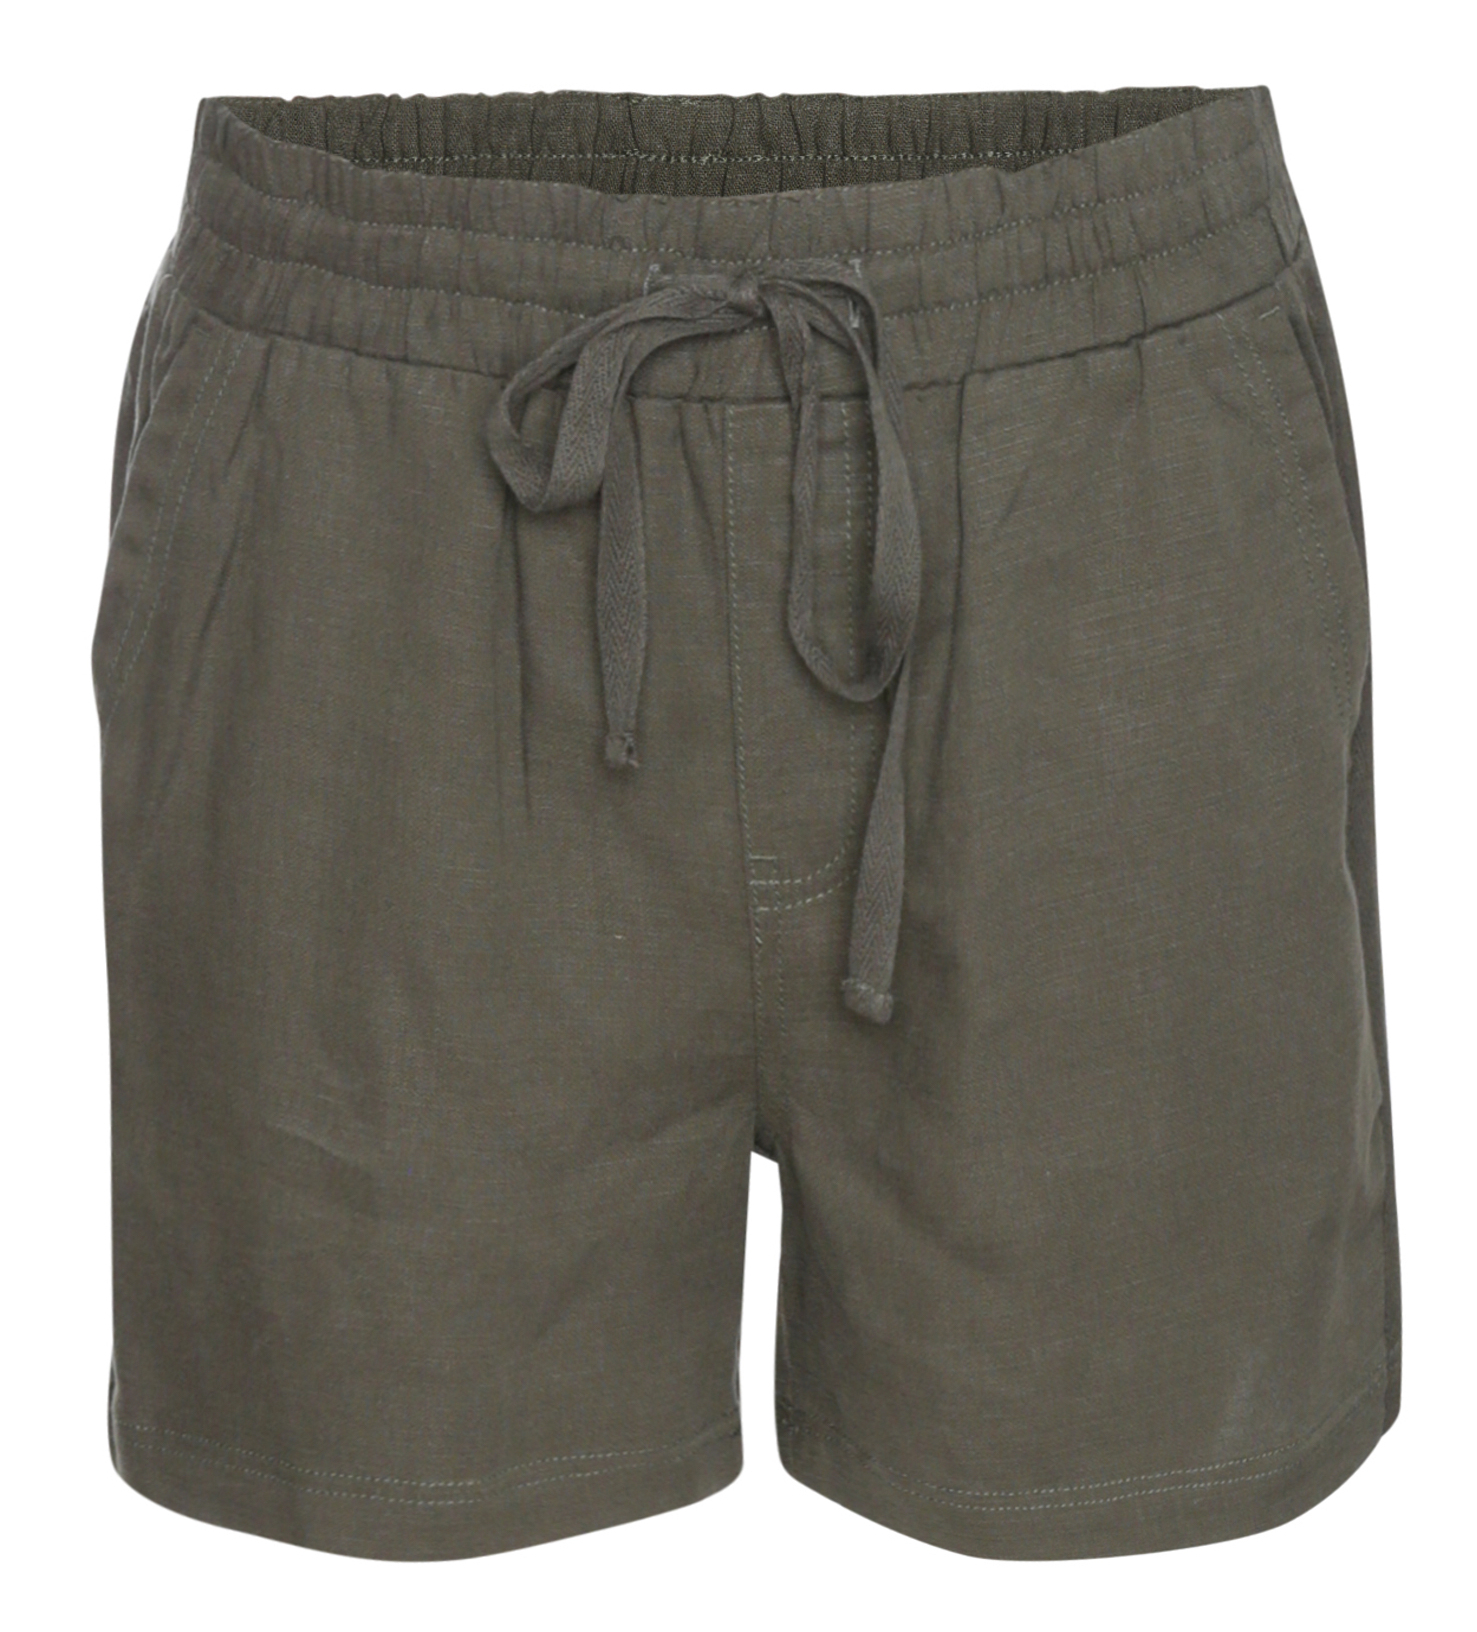 Search for Sanity Side Contrast Shorts